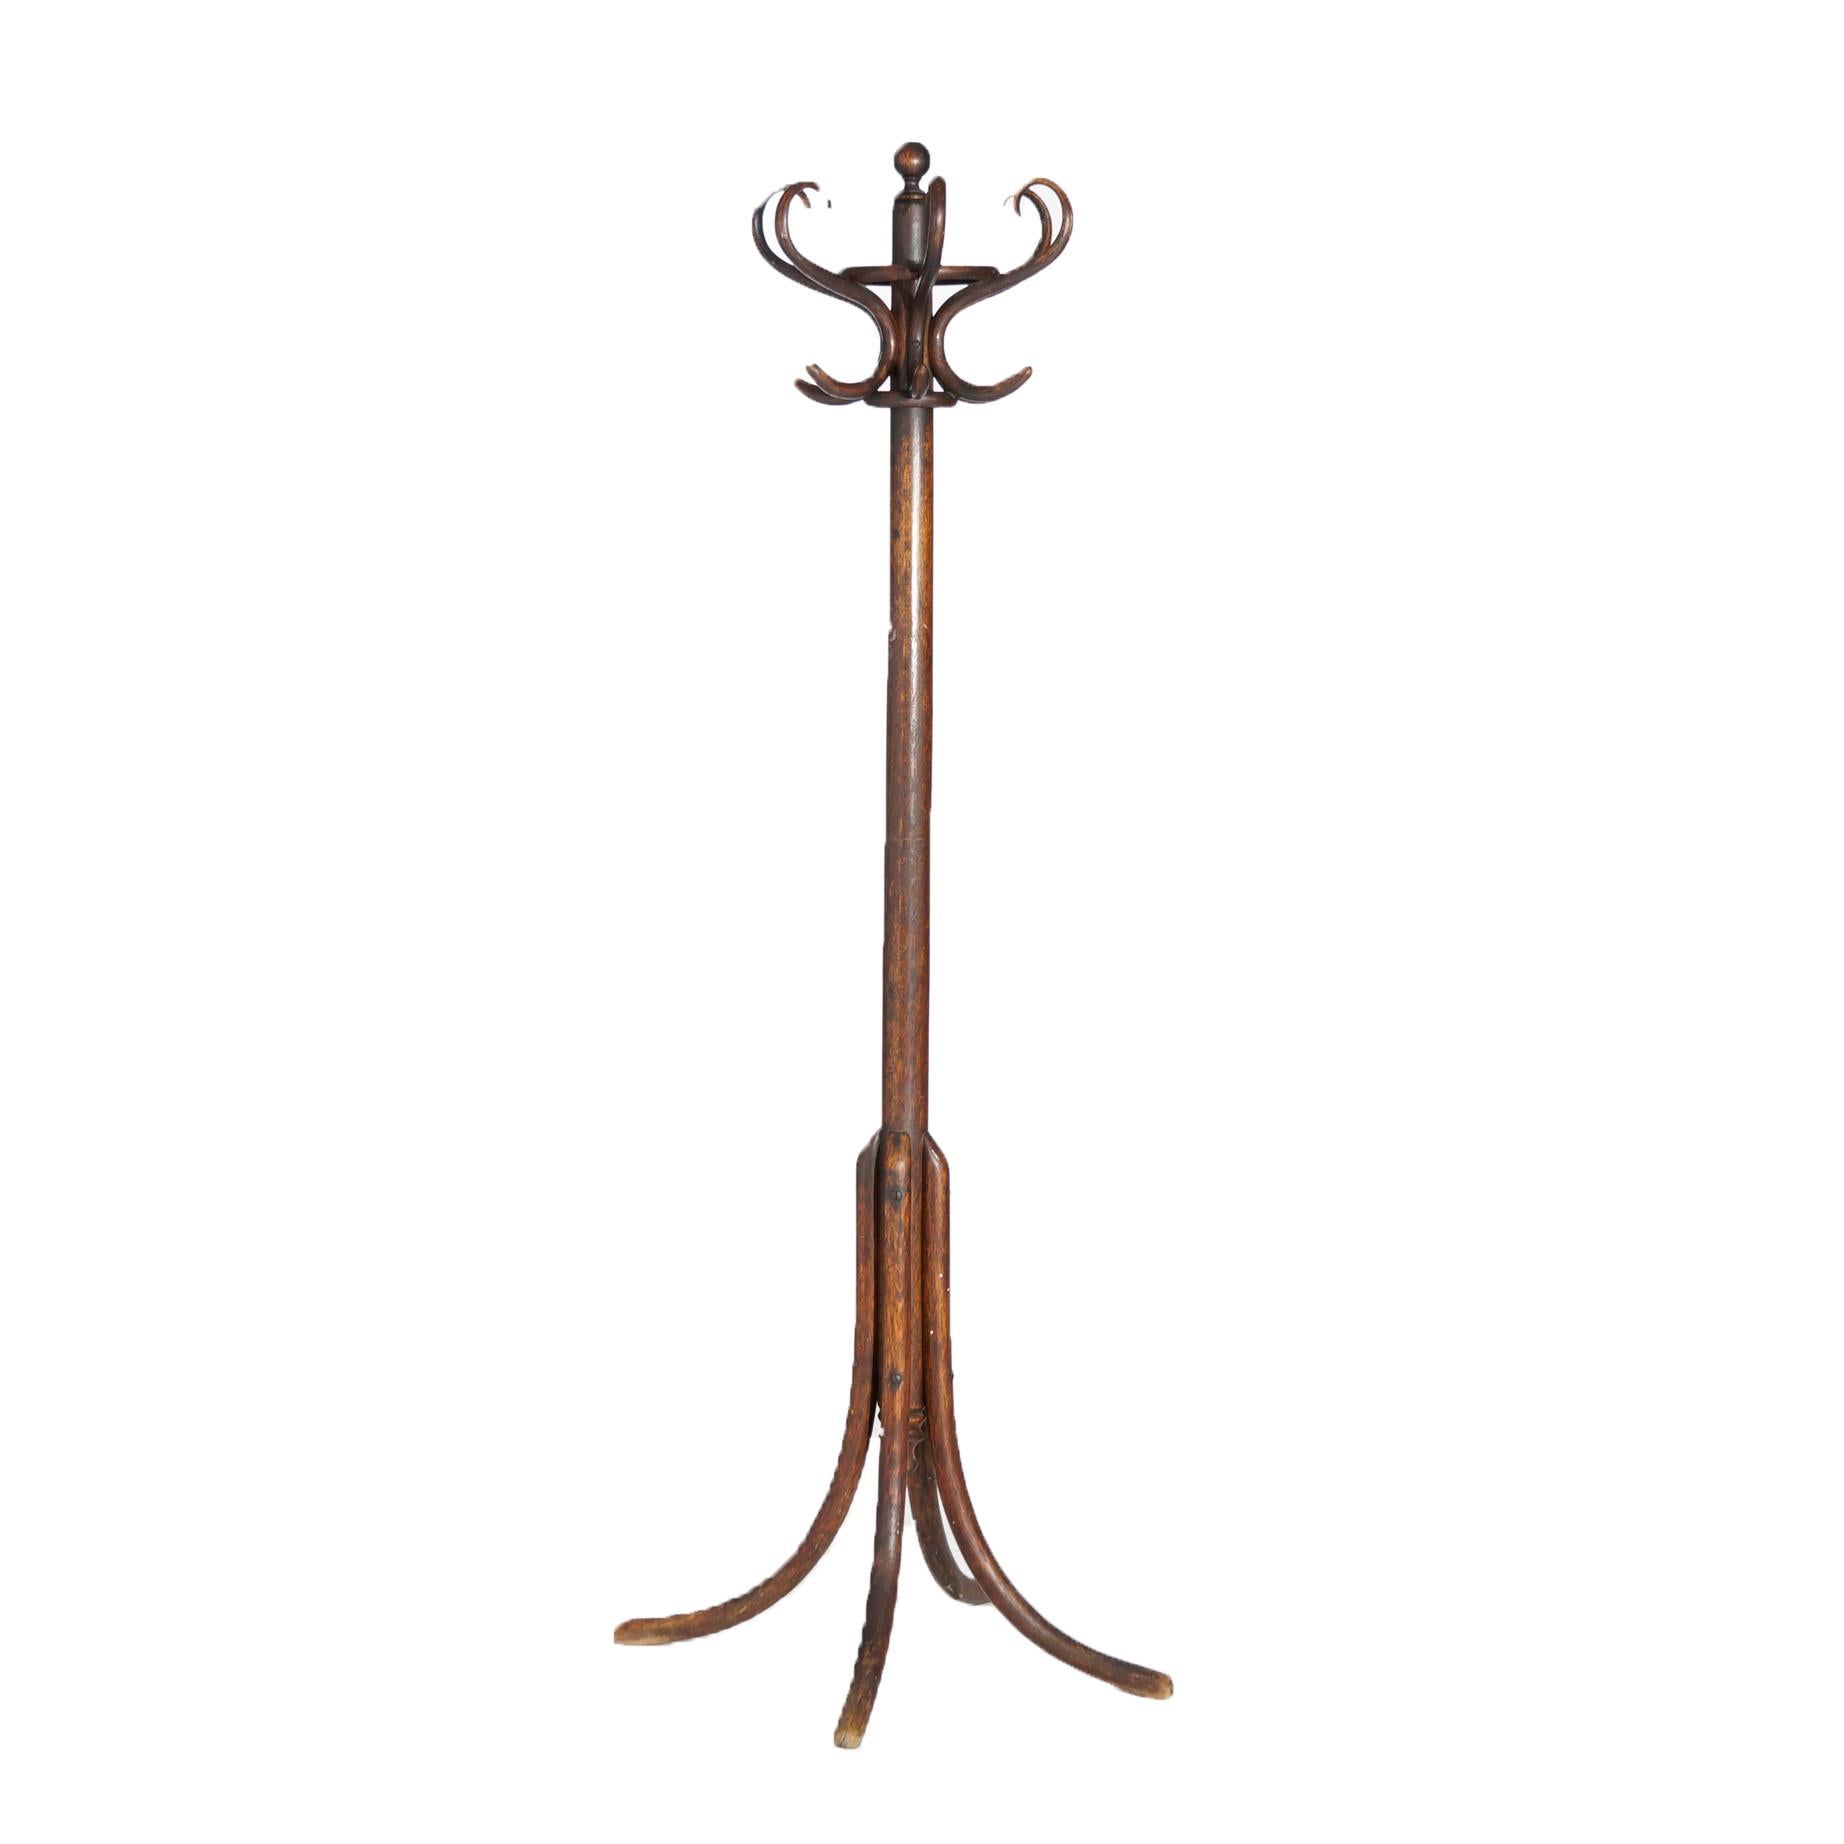 An antique Thonet hall tree offers bentwood oak construction with central column having scroll form hat hooks and raised on convex legs, c1920.

Measures- 67.5'' H x 25'' W x 25'' D.